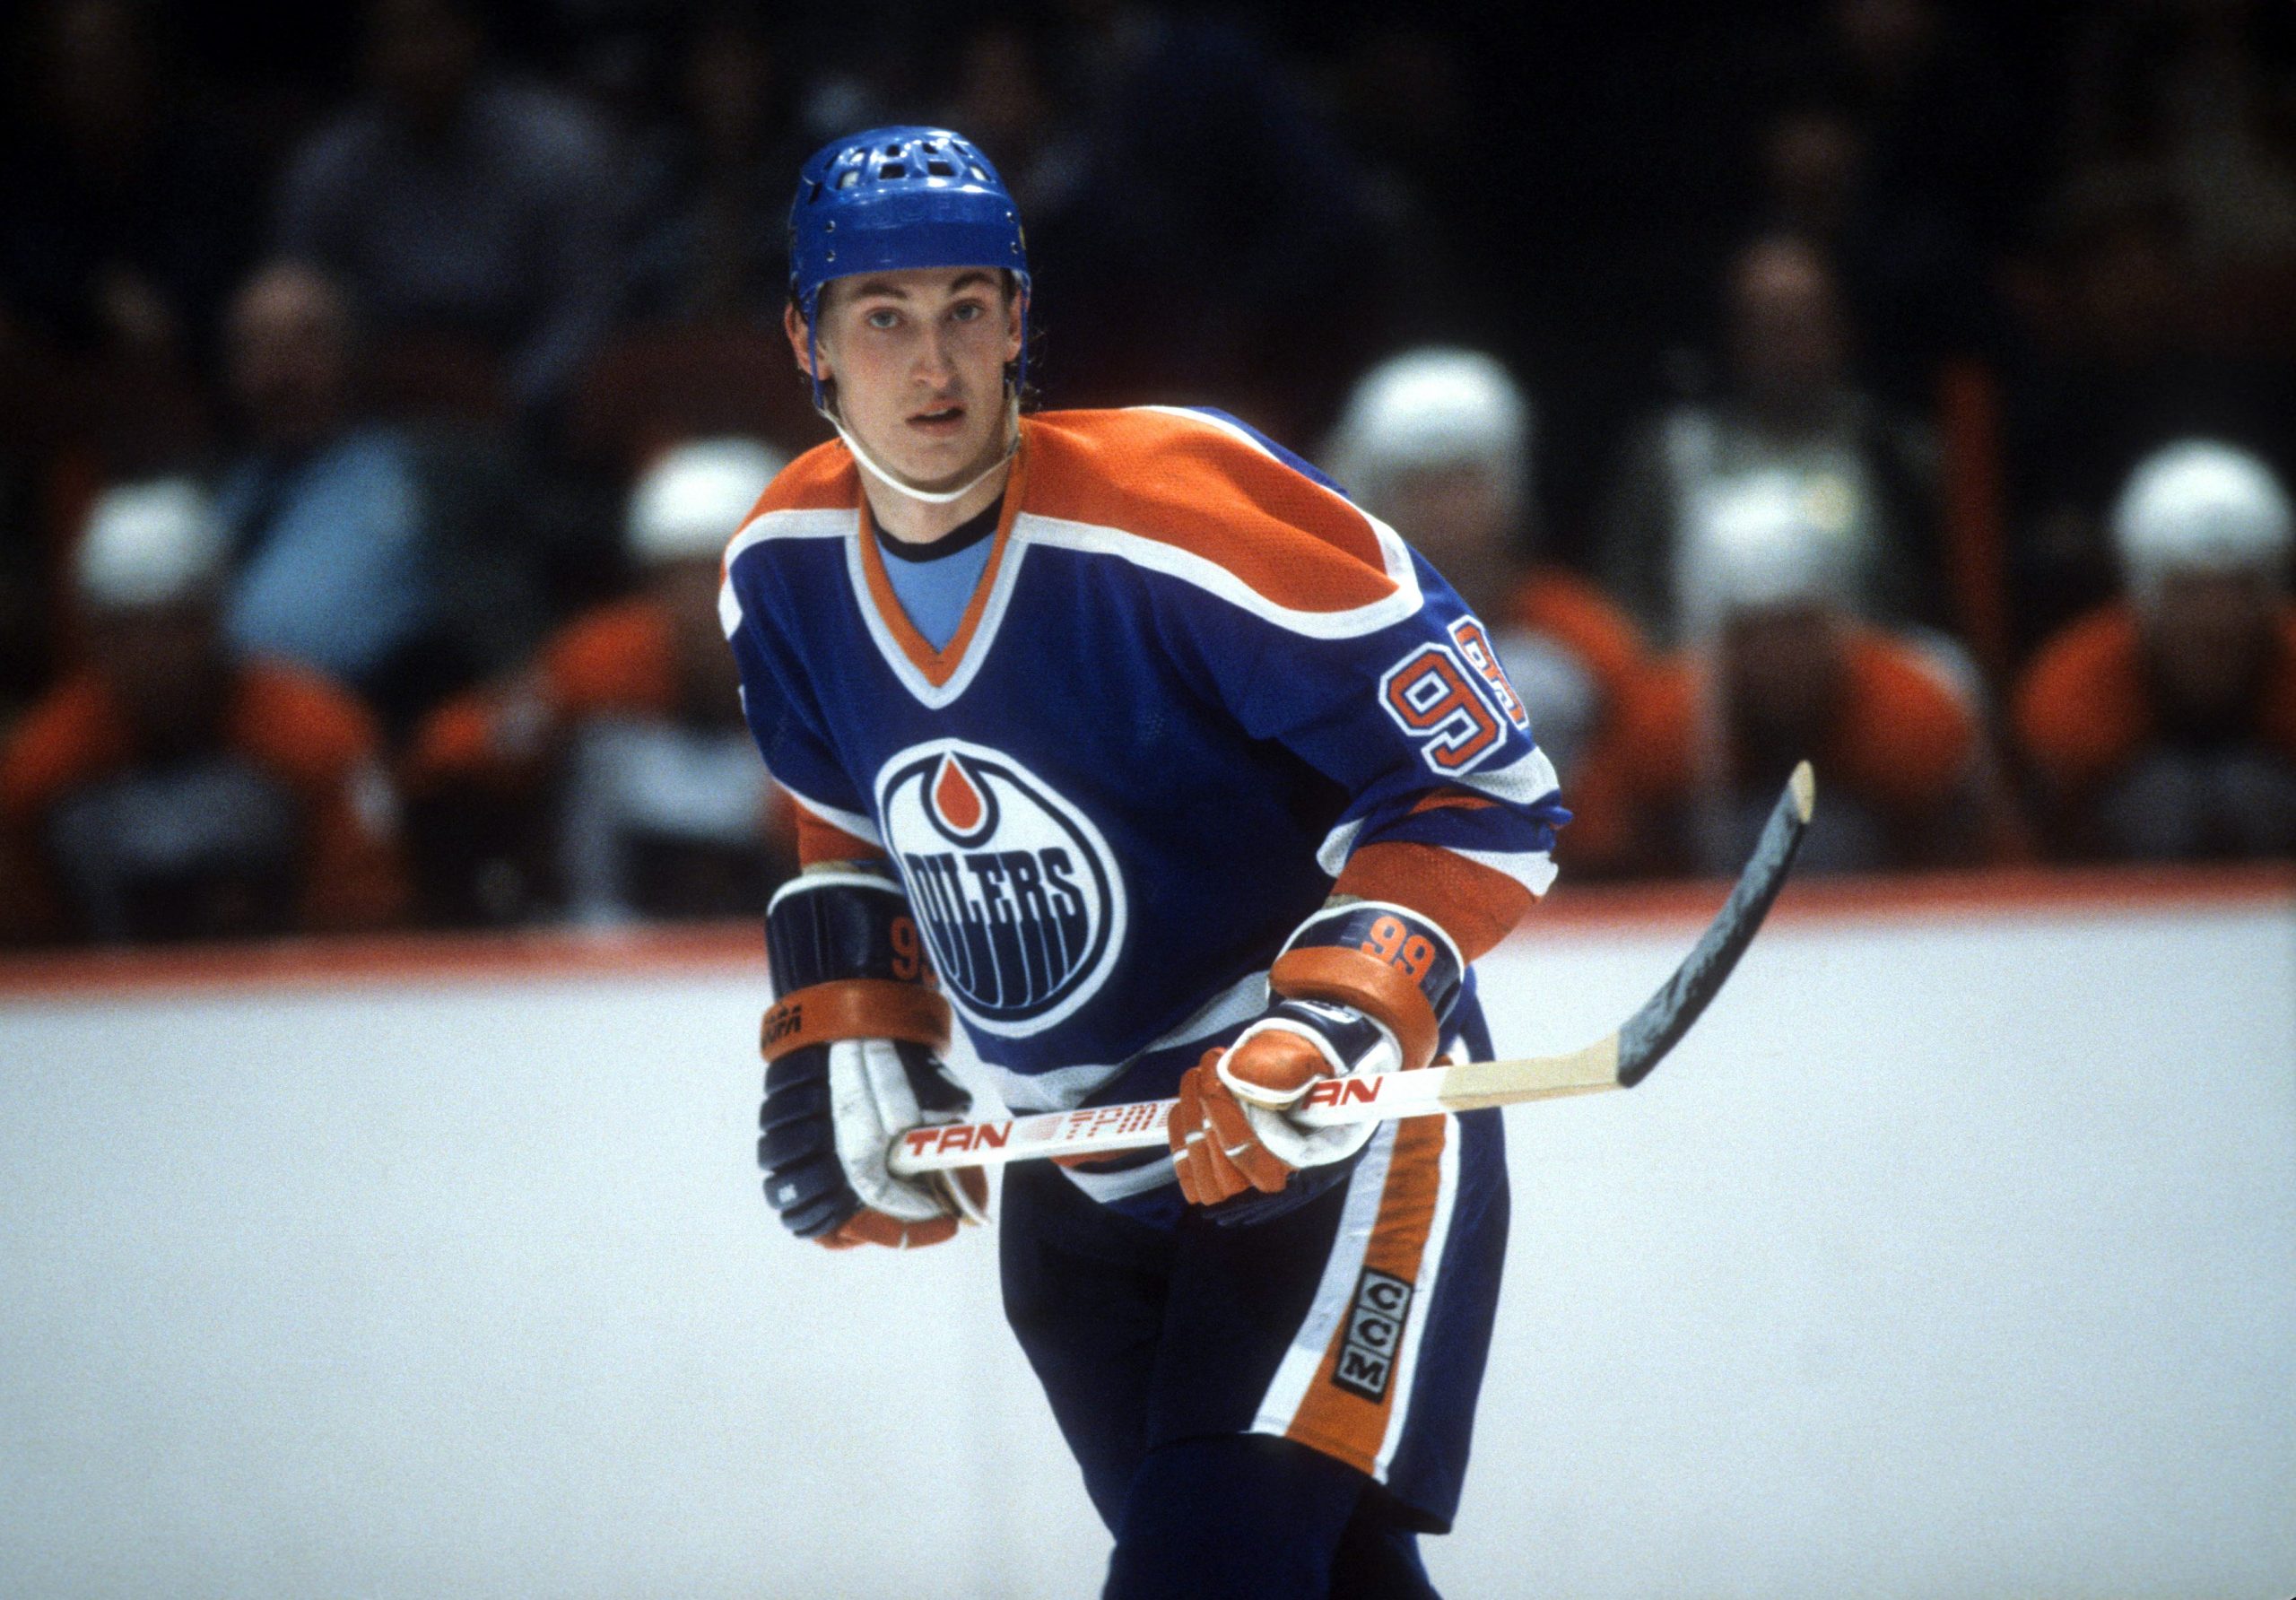 Wayne Gretzky of the Edmonton Oilers skates on the ice during an NHL game against the Philadelphia Flyers.